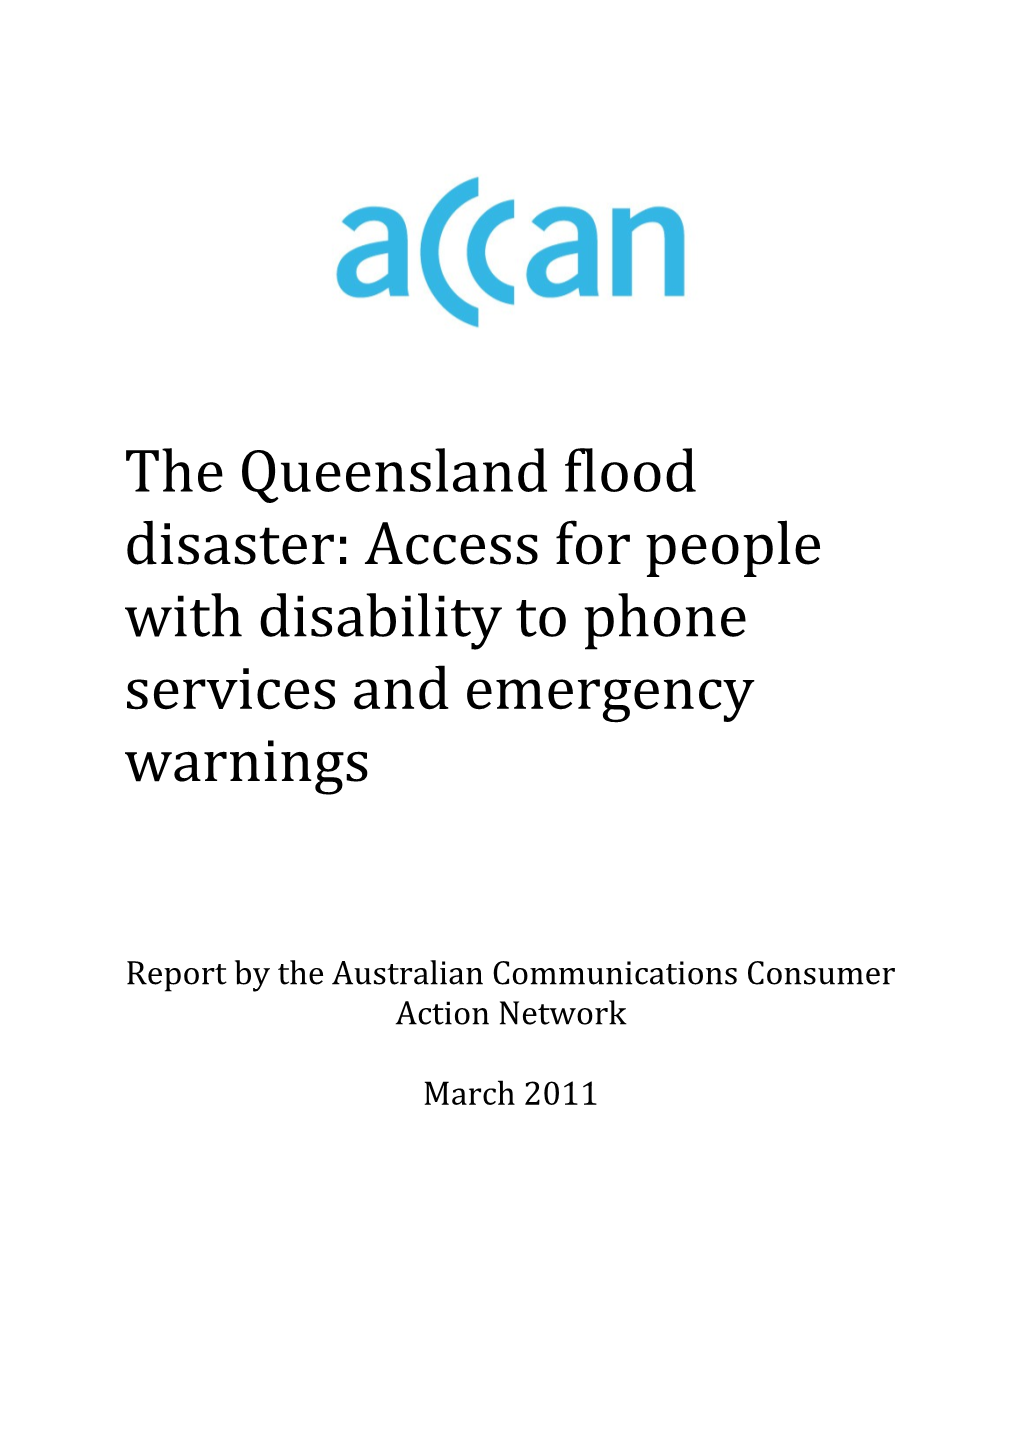 Report by the Australian Communications Consumer Action Network